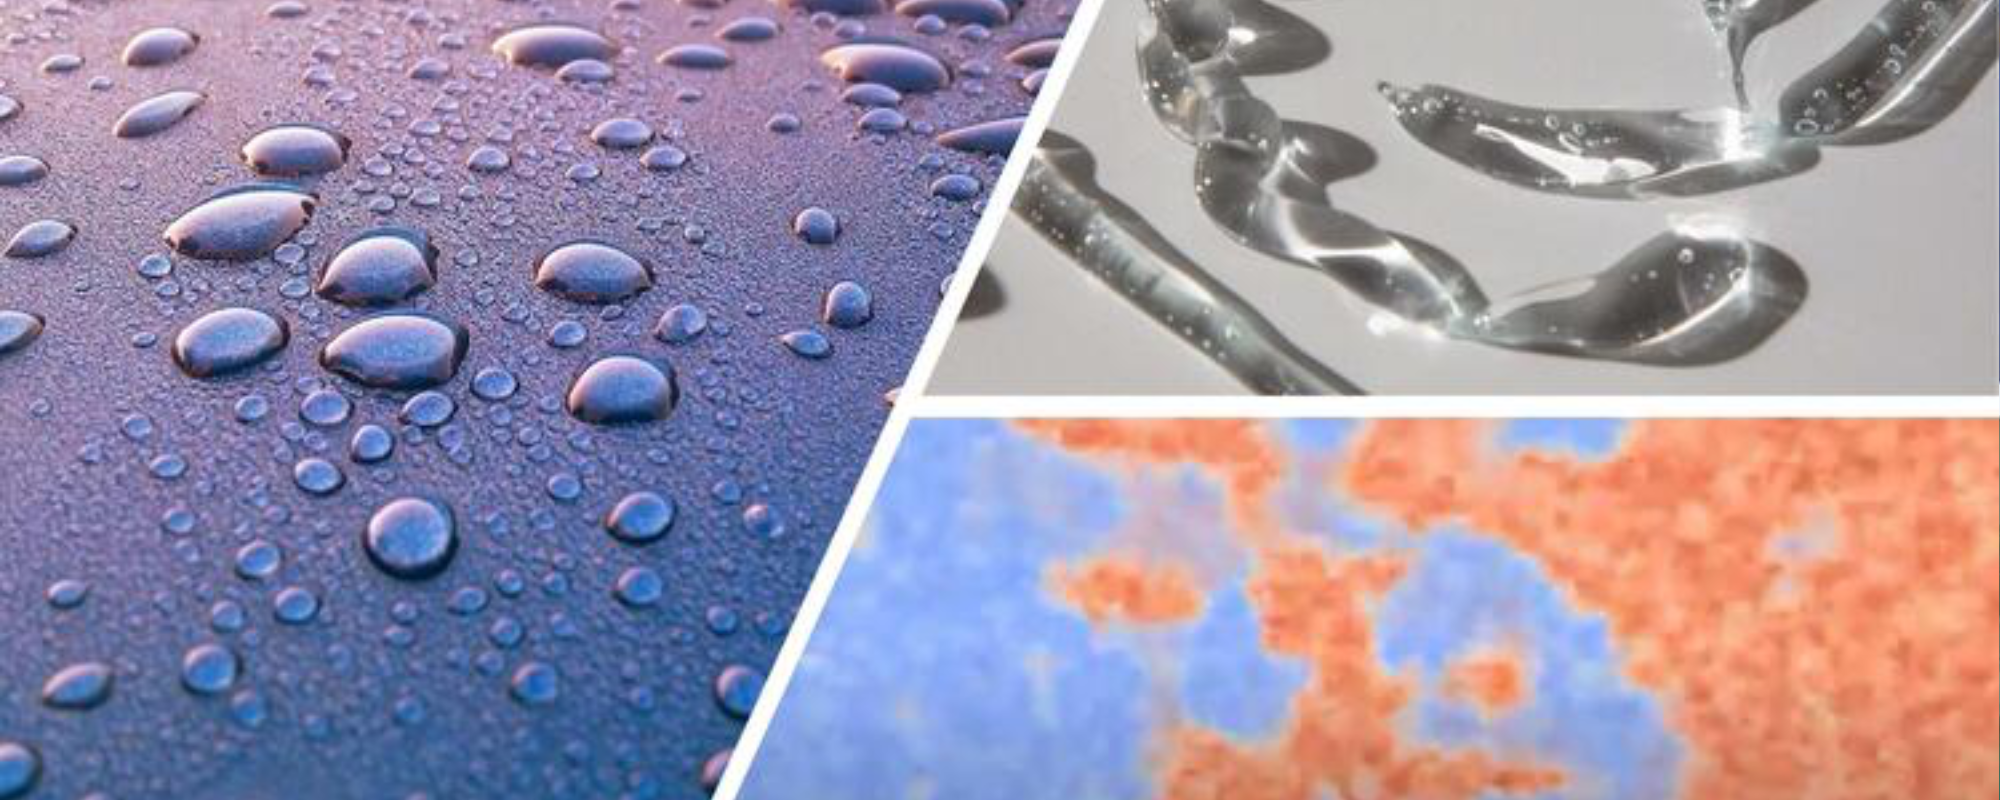 Water droplets, gel and polymers